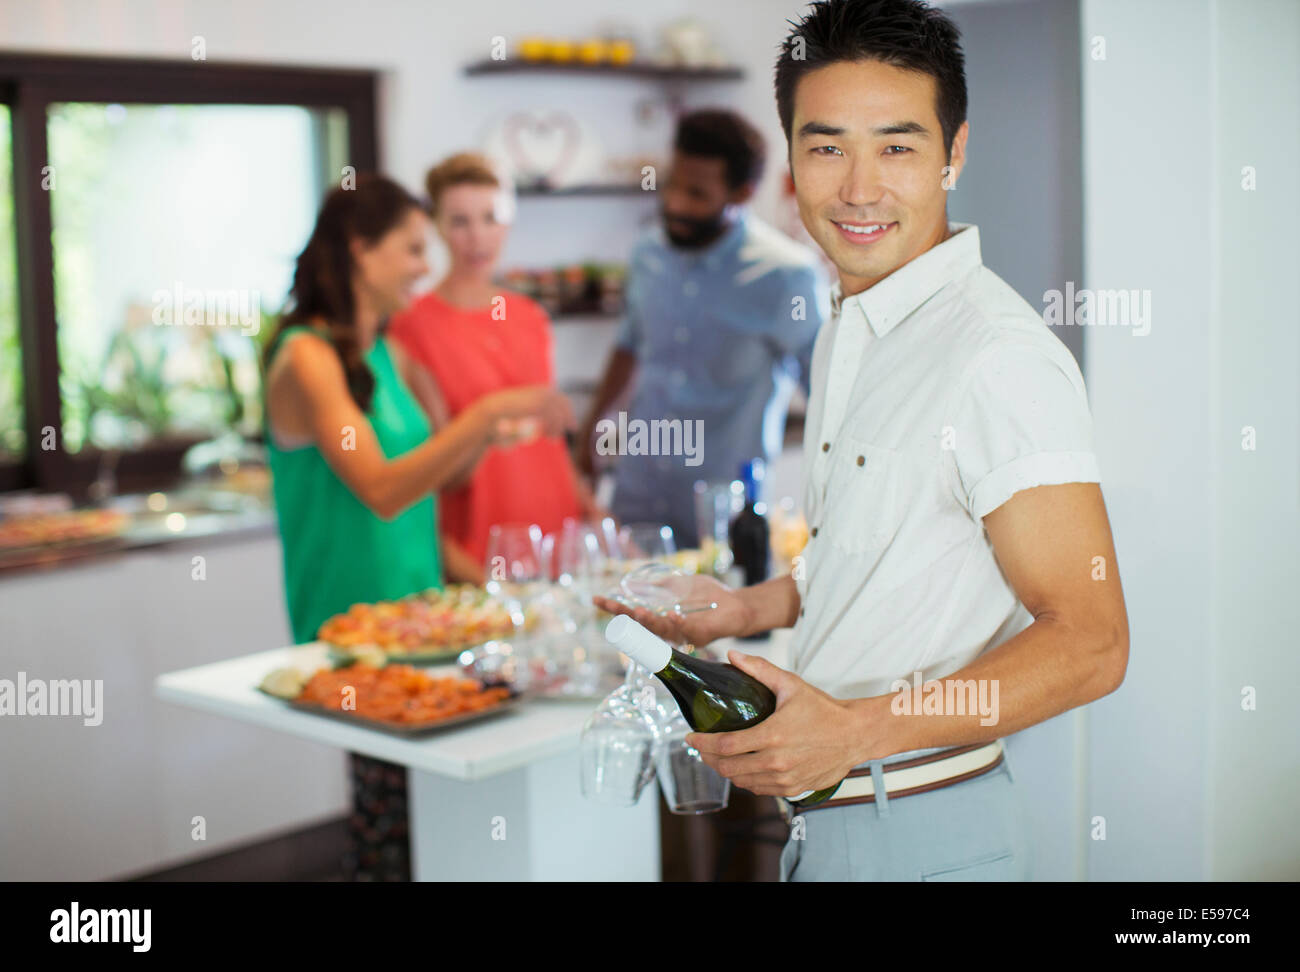 Man carrying bottle of wine at party Stock Photo